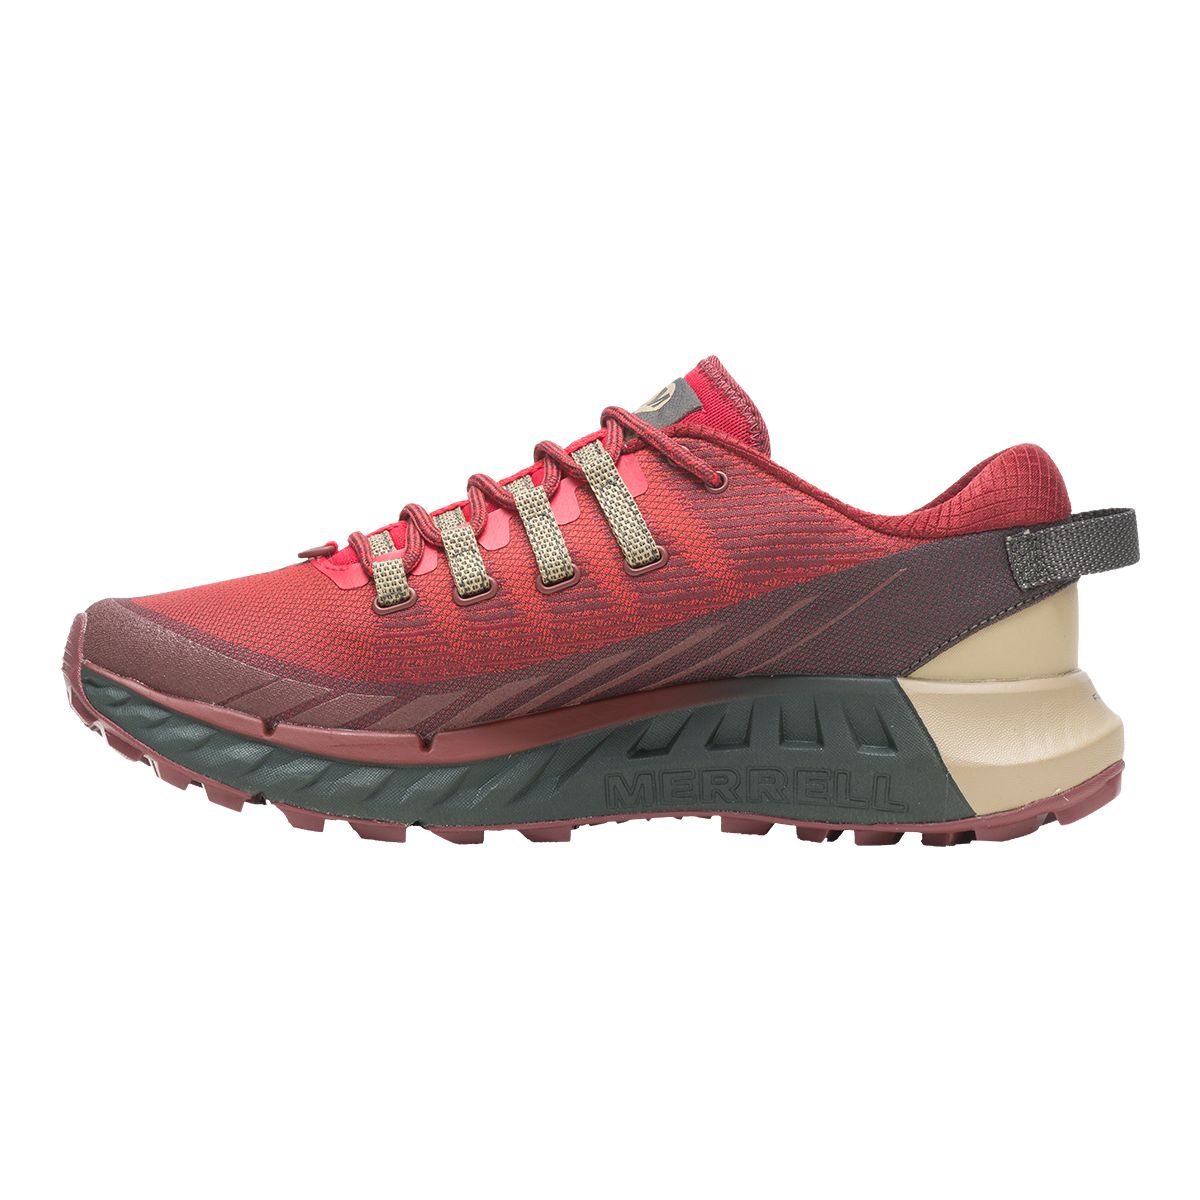  Merrell Agility Peak 4 Running Shoes for Men - Breathable  Textile Upper and Removable Insole, Comfy and Sturdy Shoes Jade 7 M